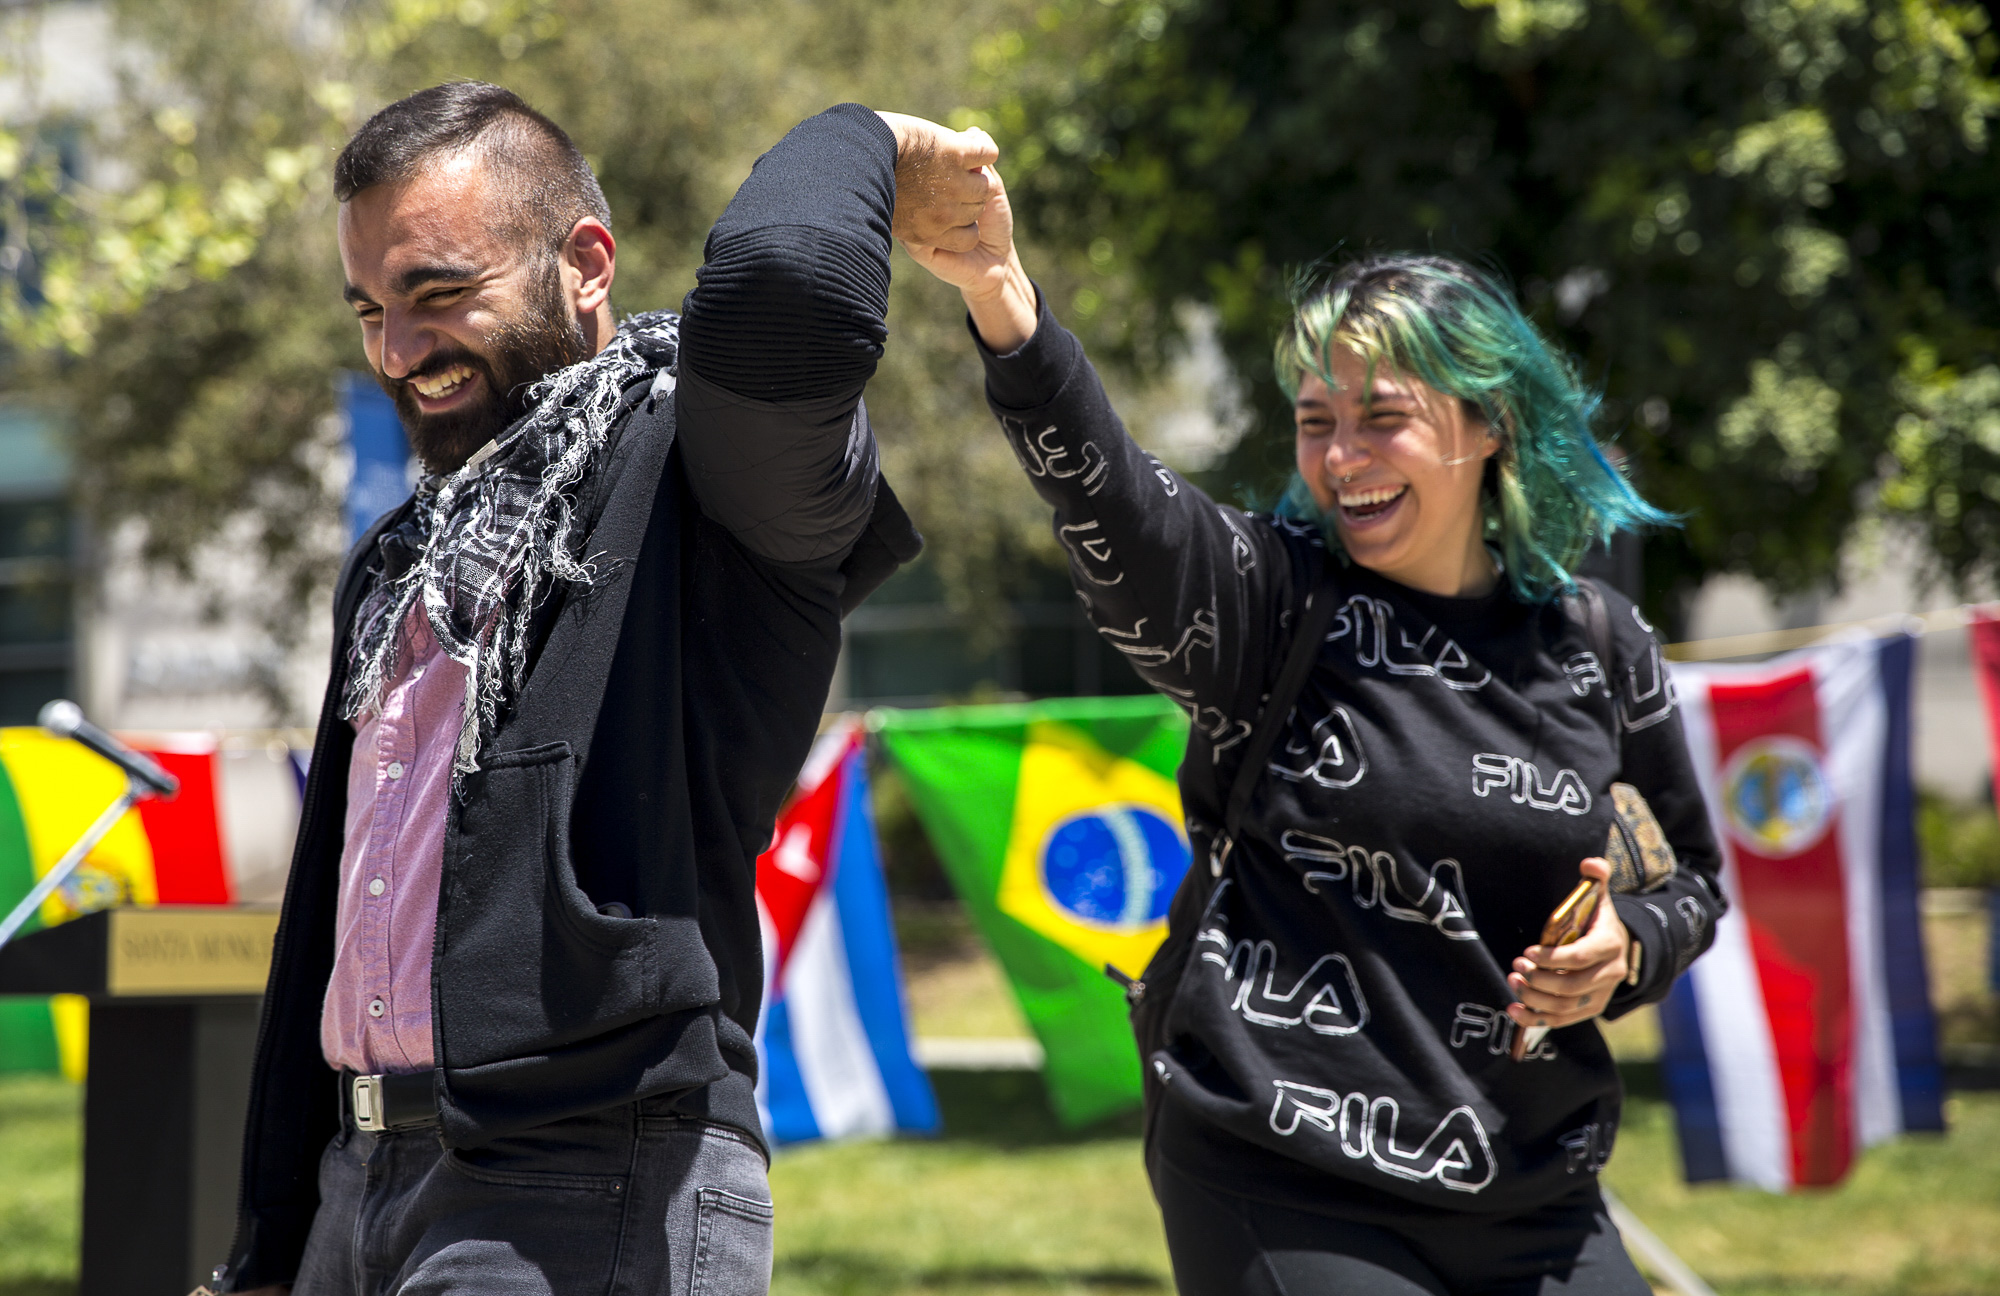  Associated Student Director of Student Advocacy Alexa Benavente (right) dances with newly elected Associated Student Vice President Hesham Jarmakani (left) during the Cinco de Mayo Celebratory event organized by Santa Monica College club (SMC) “Adel